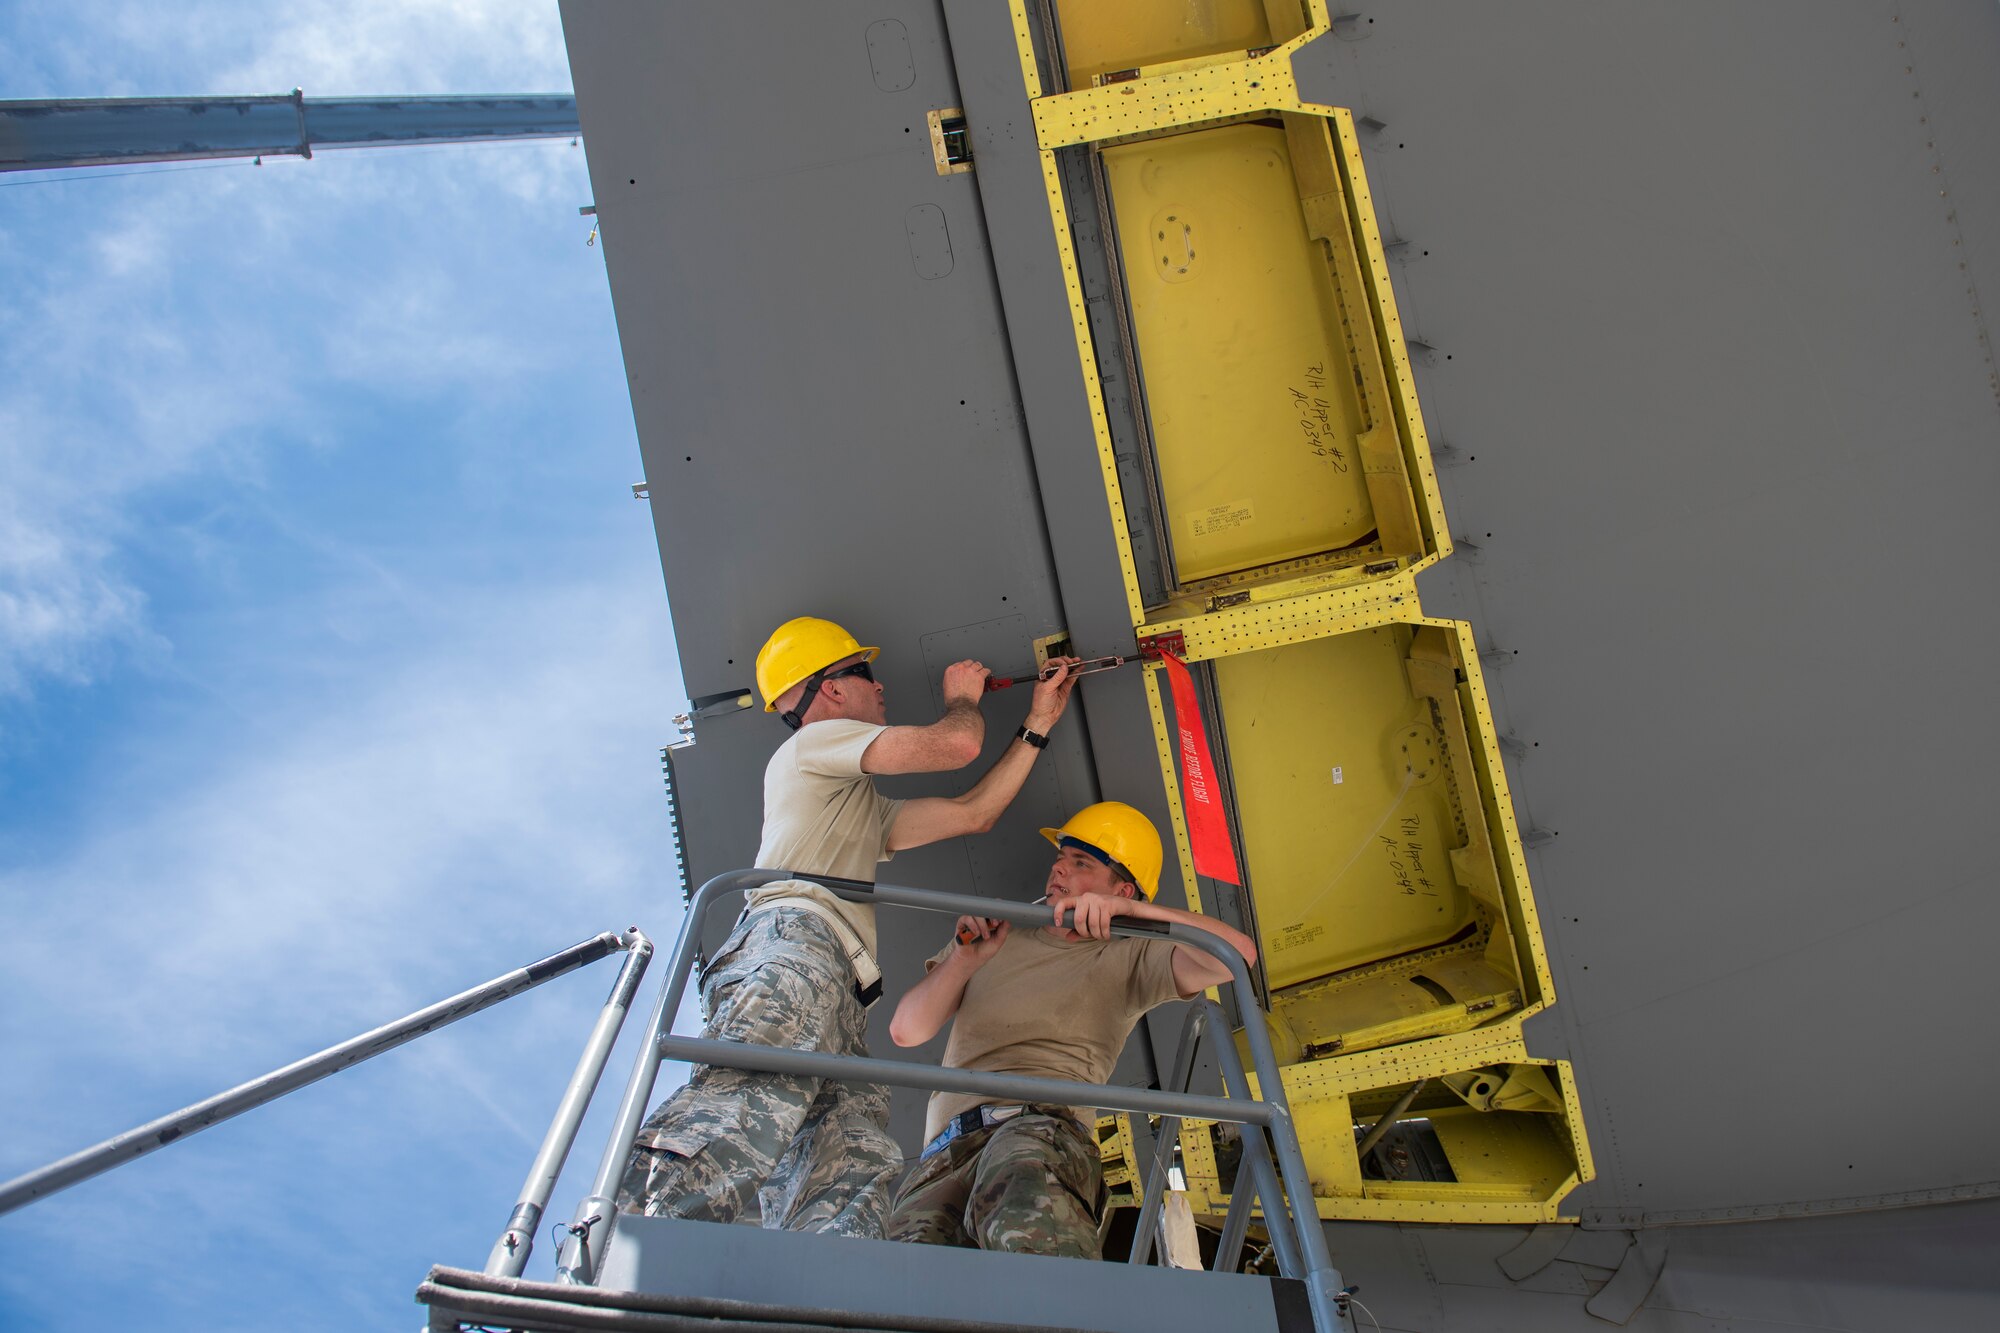 4th CES & 916th MXS work together for aircraft repair